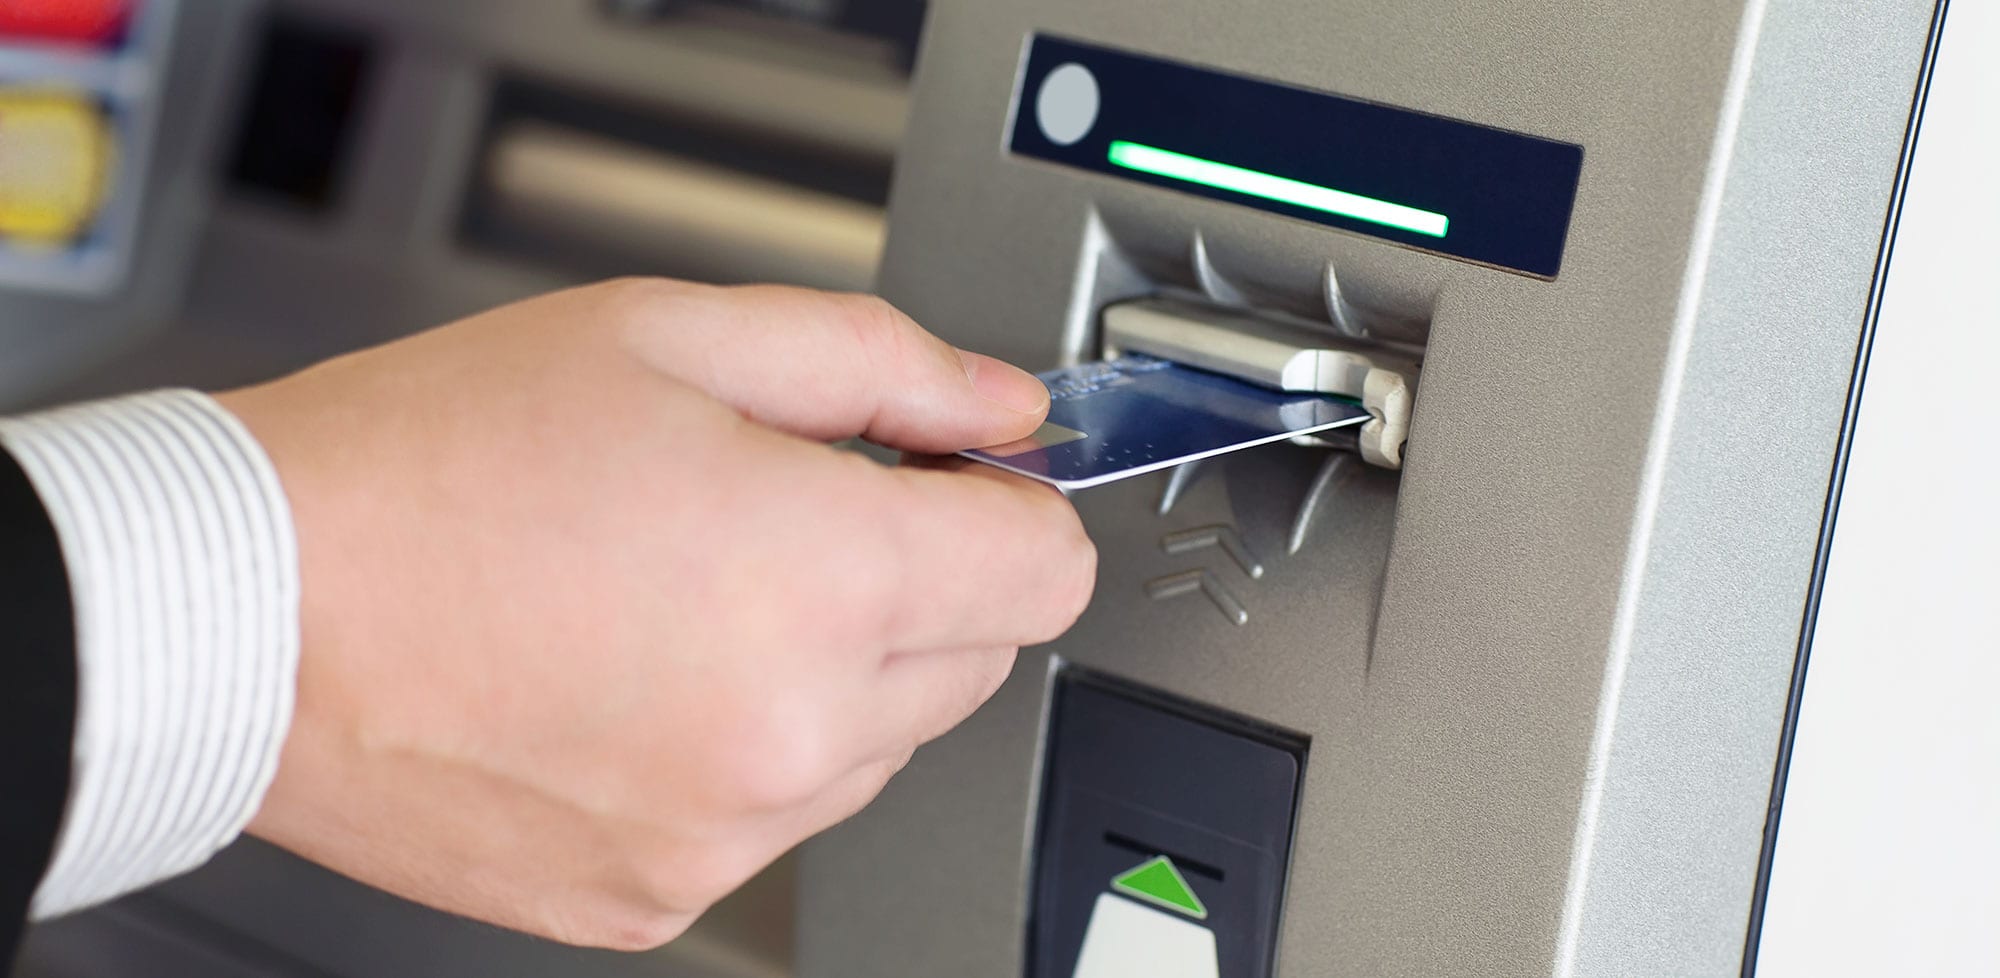 Originally published on September 23, 2010, and updated on May 22, 2023. Think about the last time you used an ATM. Chances are, you have one in your 